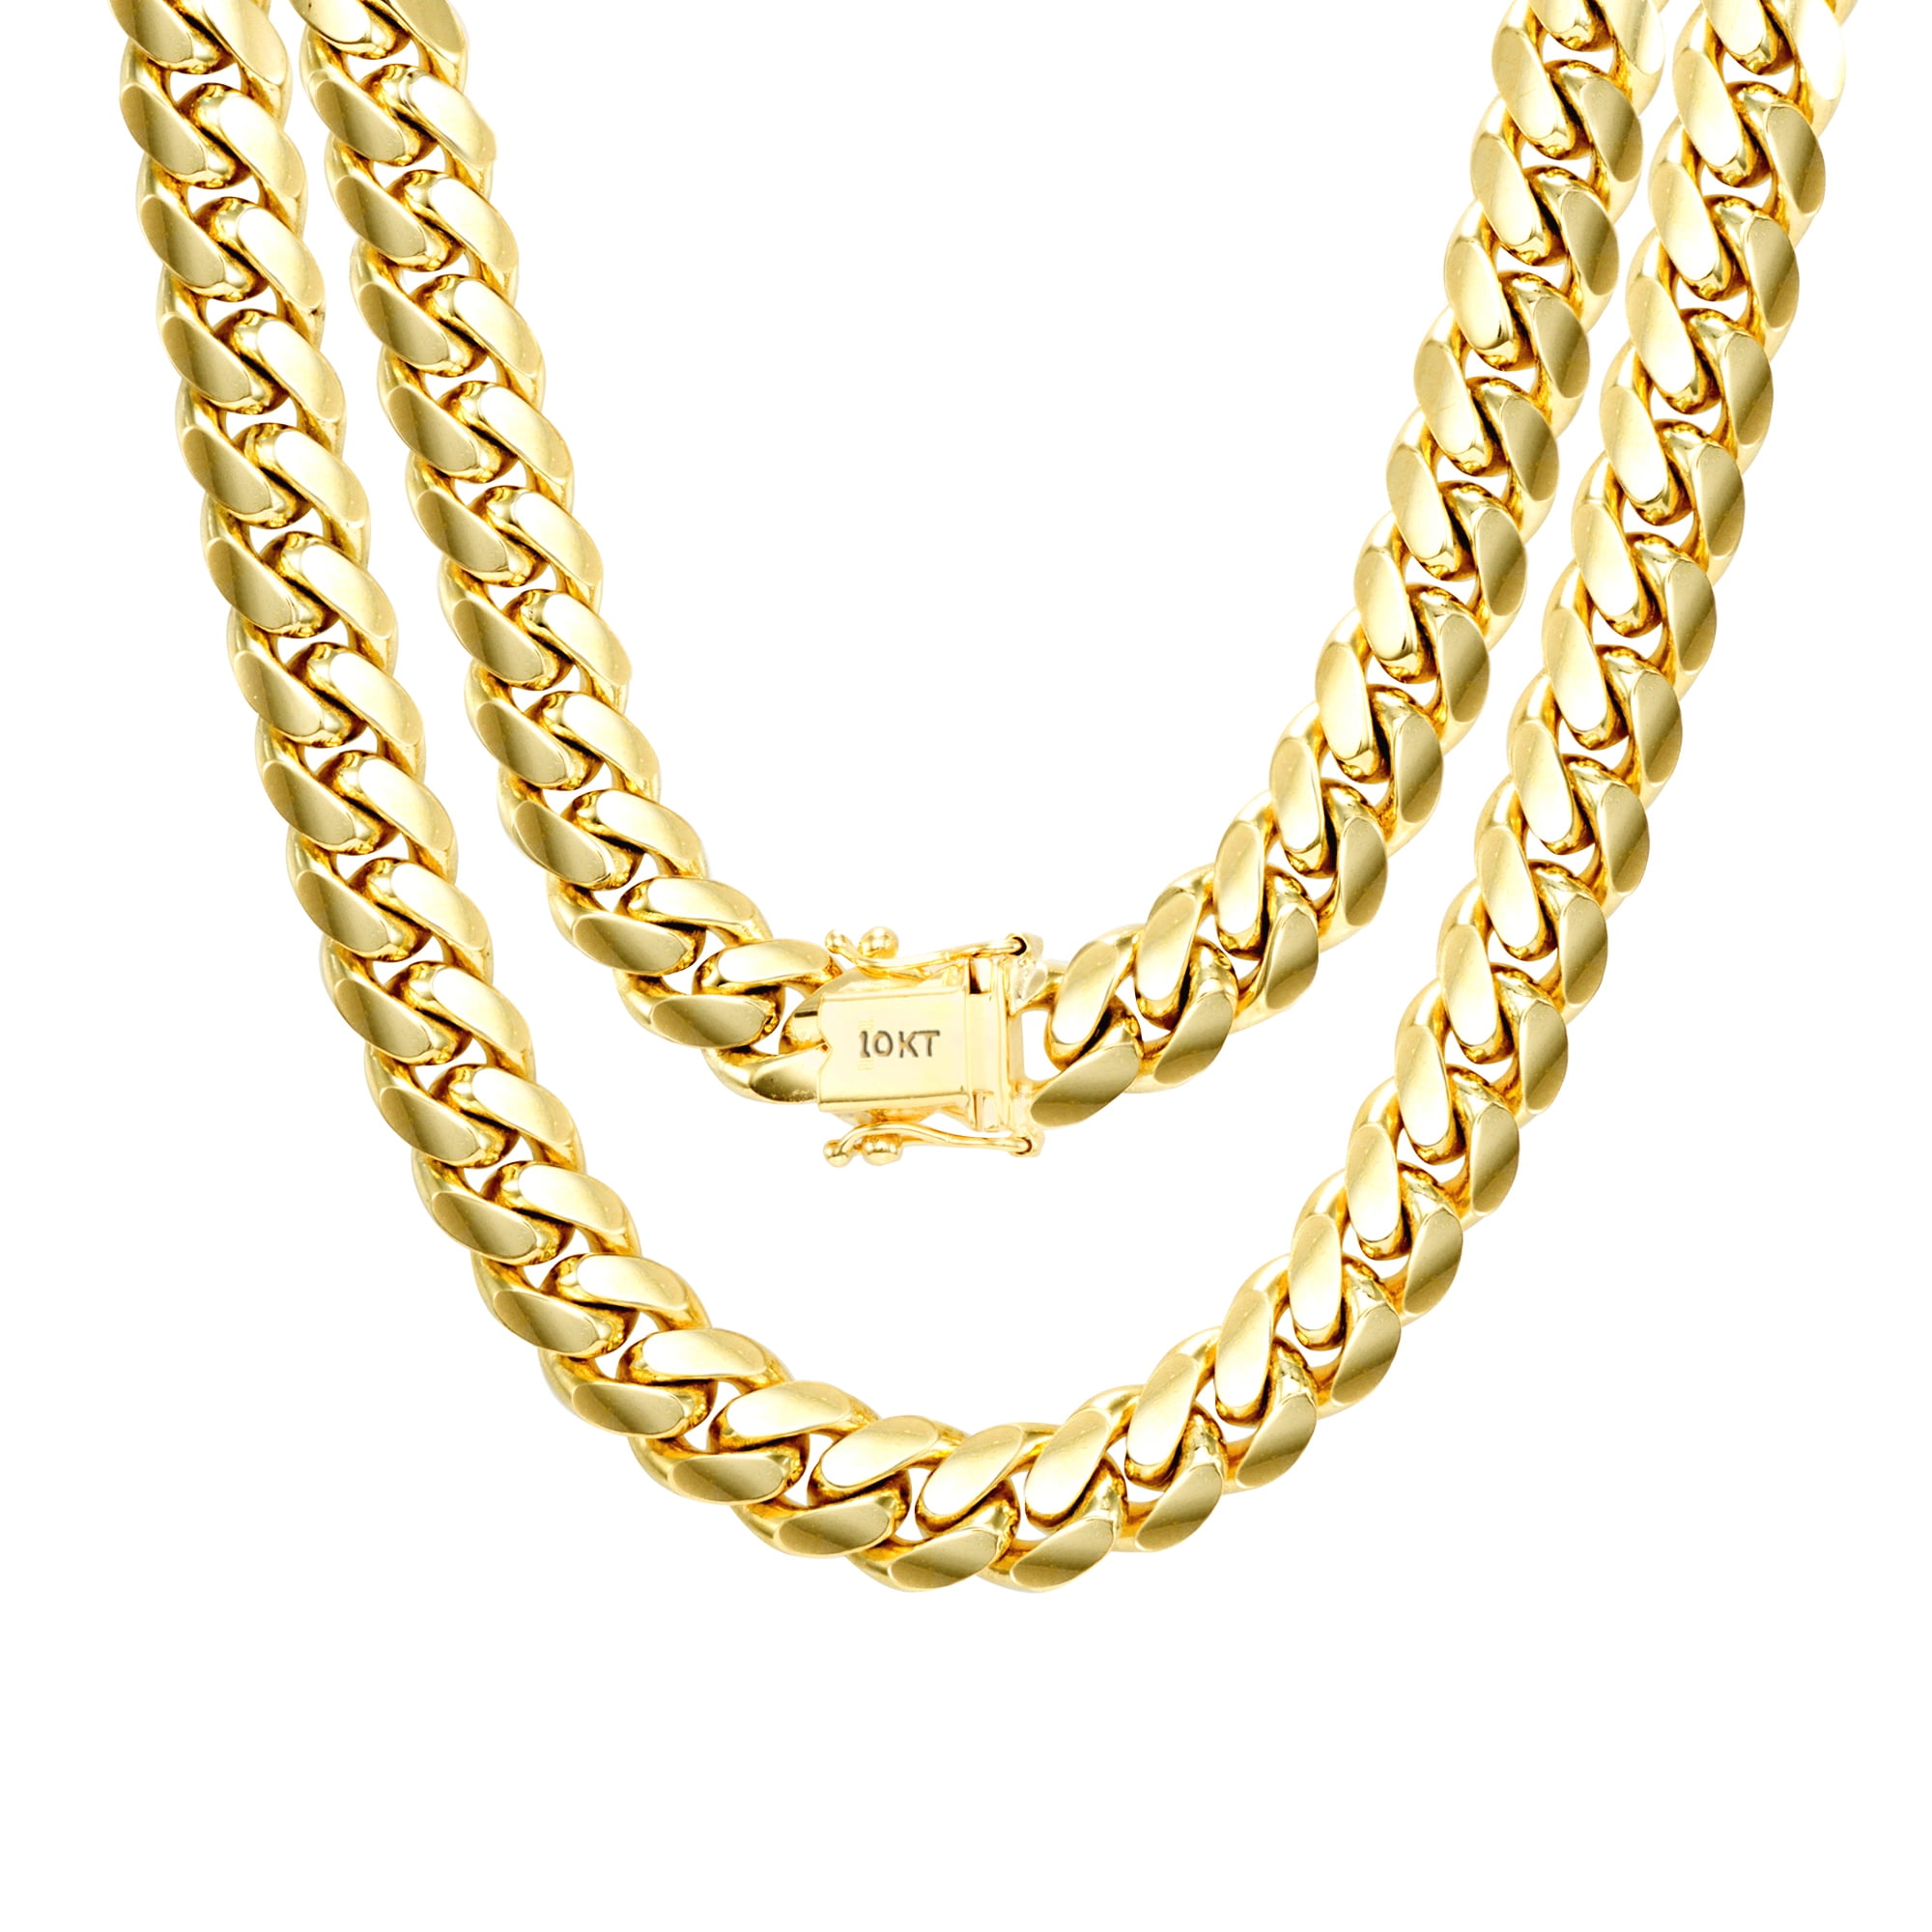 GOLD IDEA JEWELRY 3MM /4MM Solid Luxurious Miami Cuban Link Chain Heavy 14k Gold/White Gold Plated Stainless Steel Bracelet and Necklace for Men Women